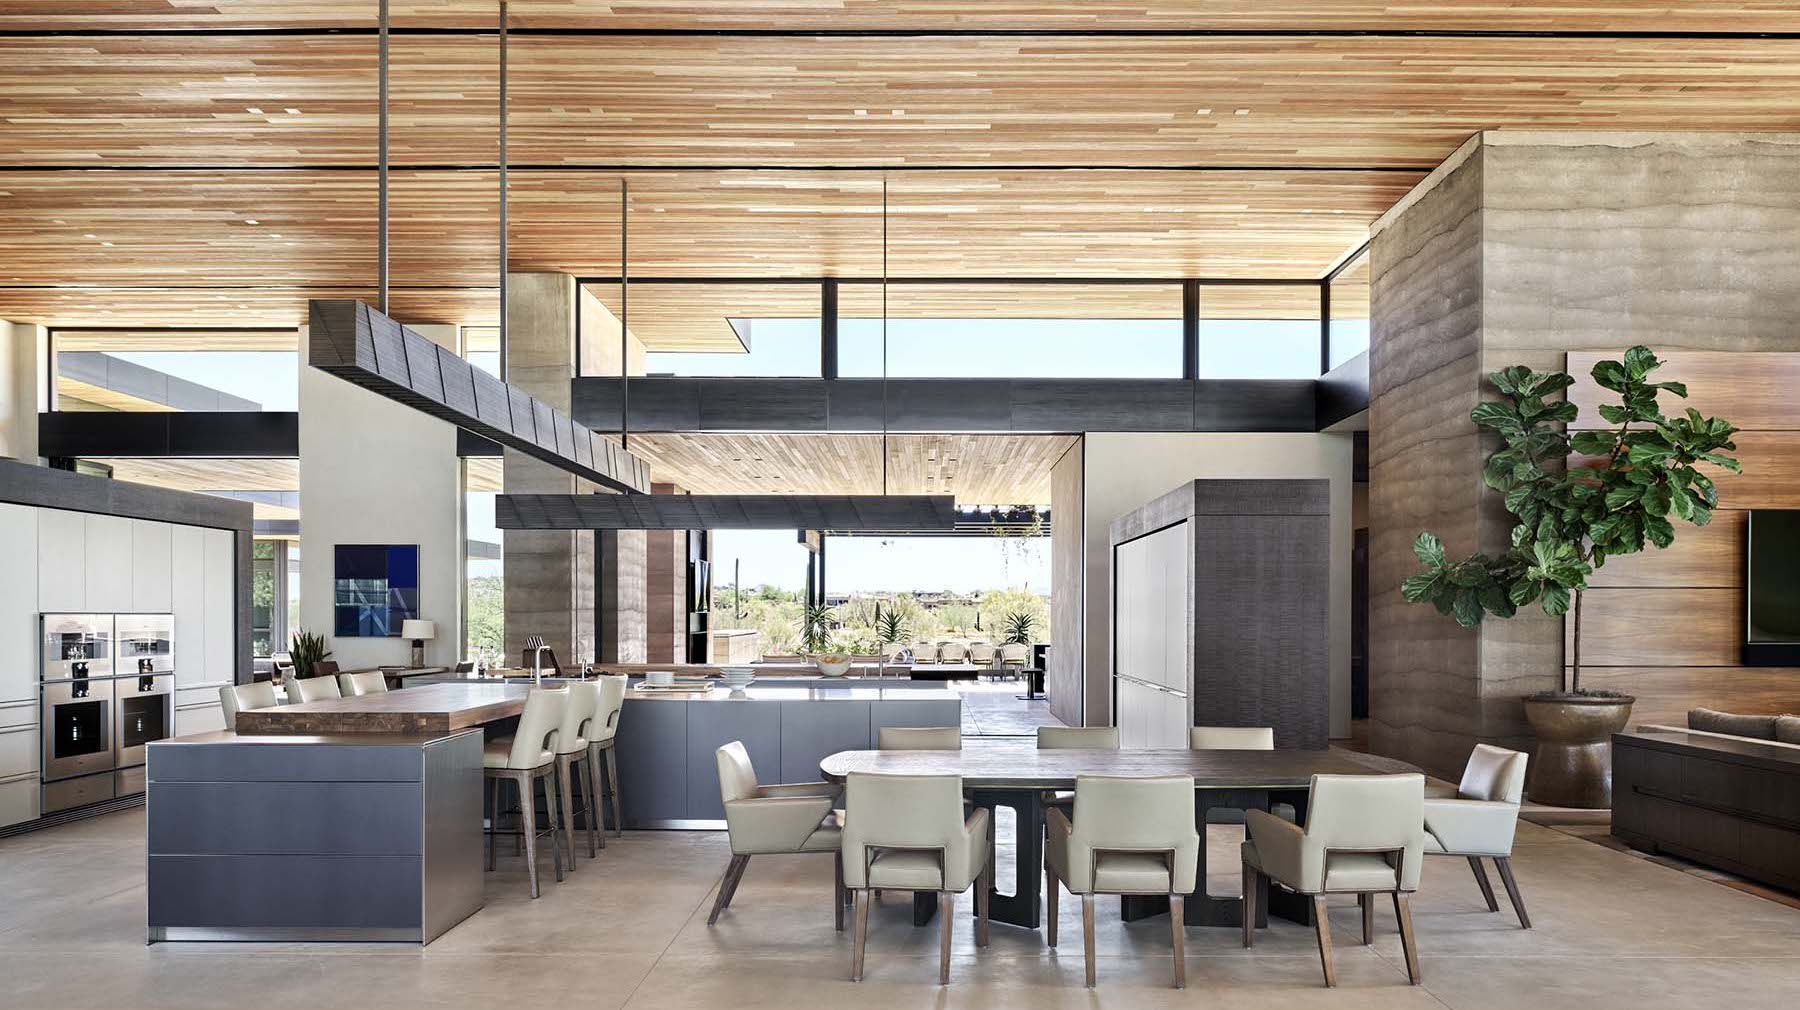 STRATA feature 3 Located in Scottsdale Ariz Drewett Works is an award winning architecture firm specializing in luxury residential hospitality and commercial architecture